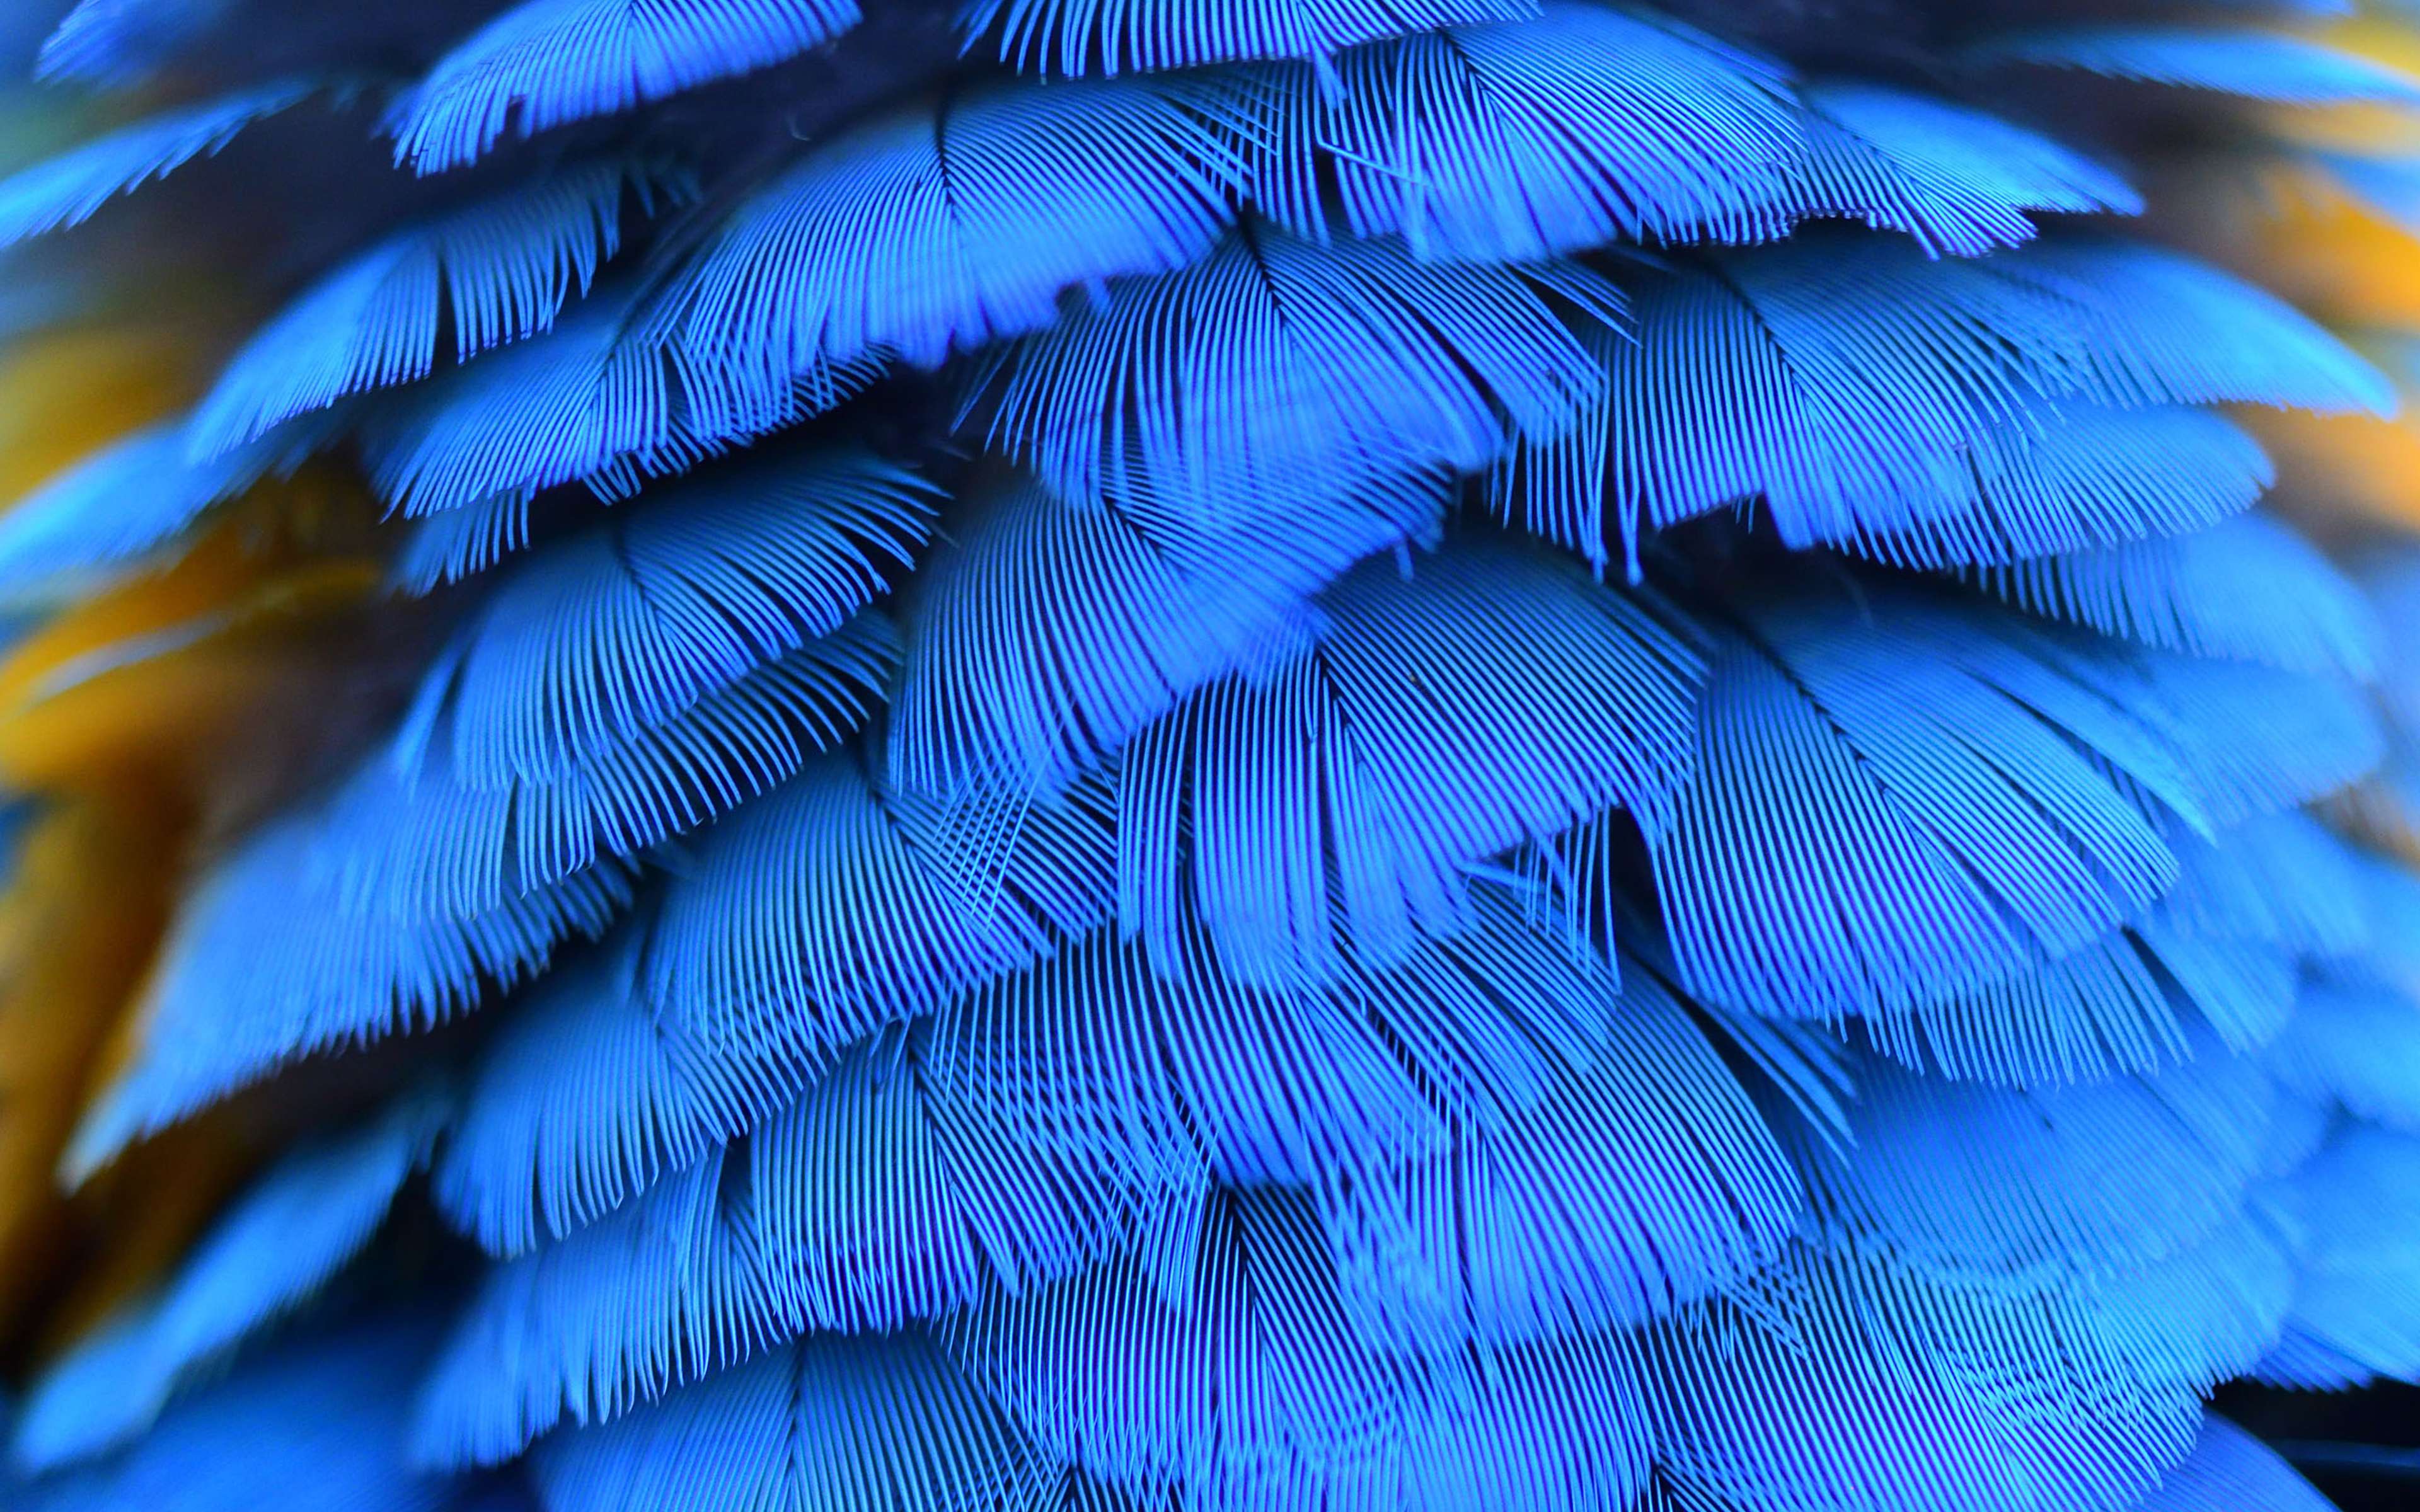 Texture of beautiful feather Blue Macaw bird close up line detail.